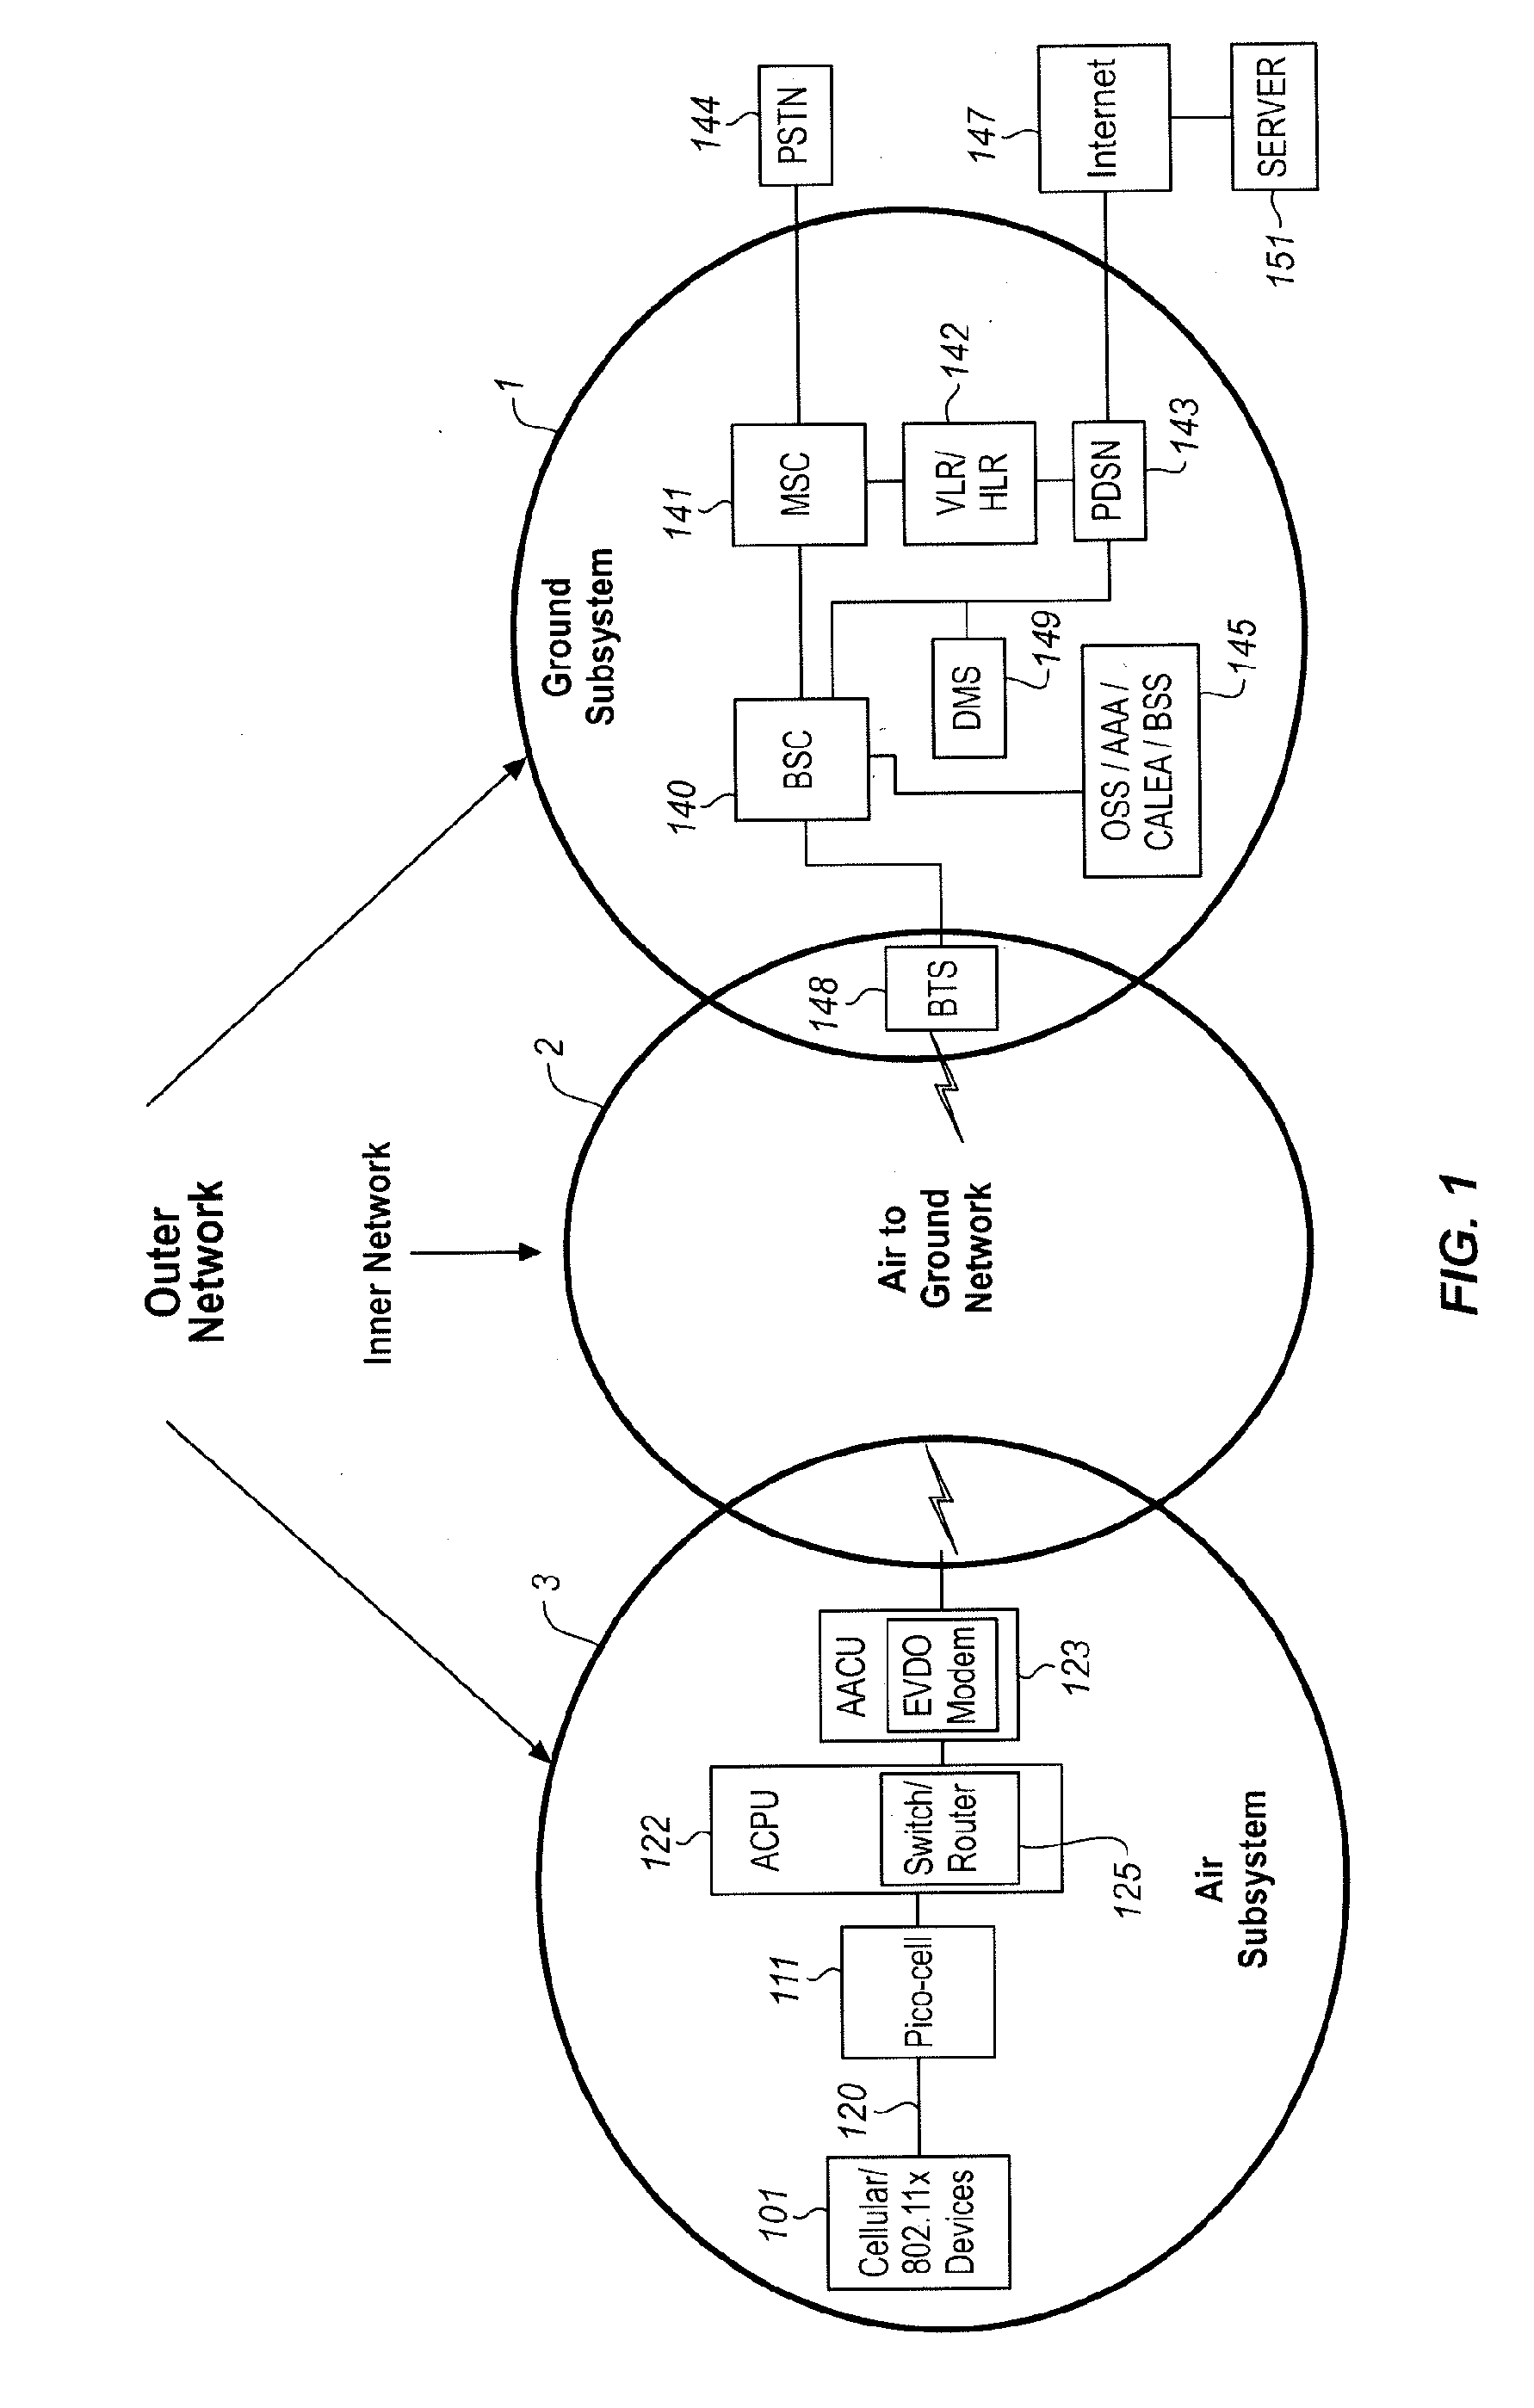 Differentiated Services Code Point Mirroring For Wireless Communications